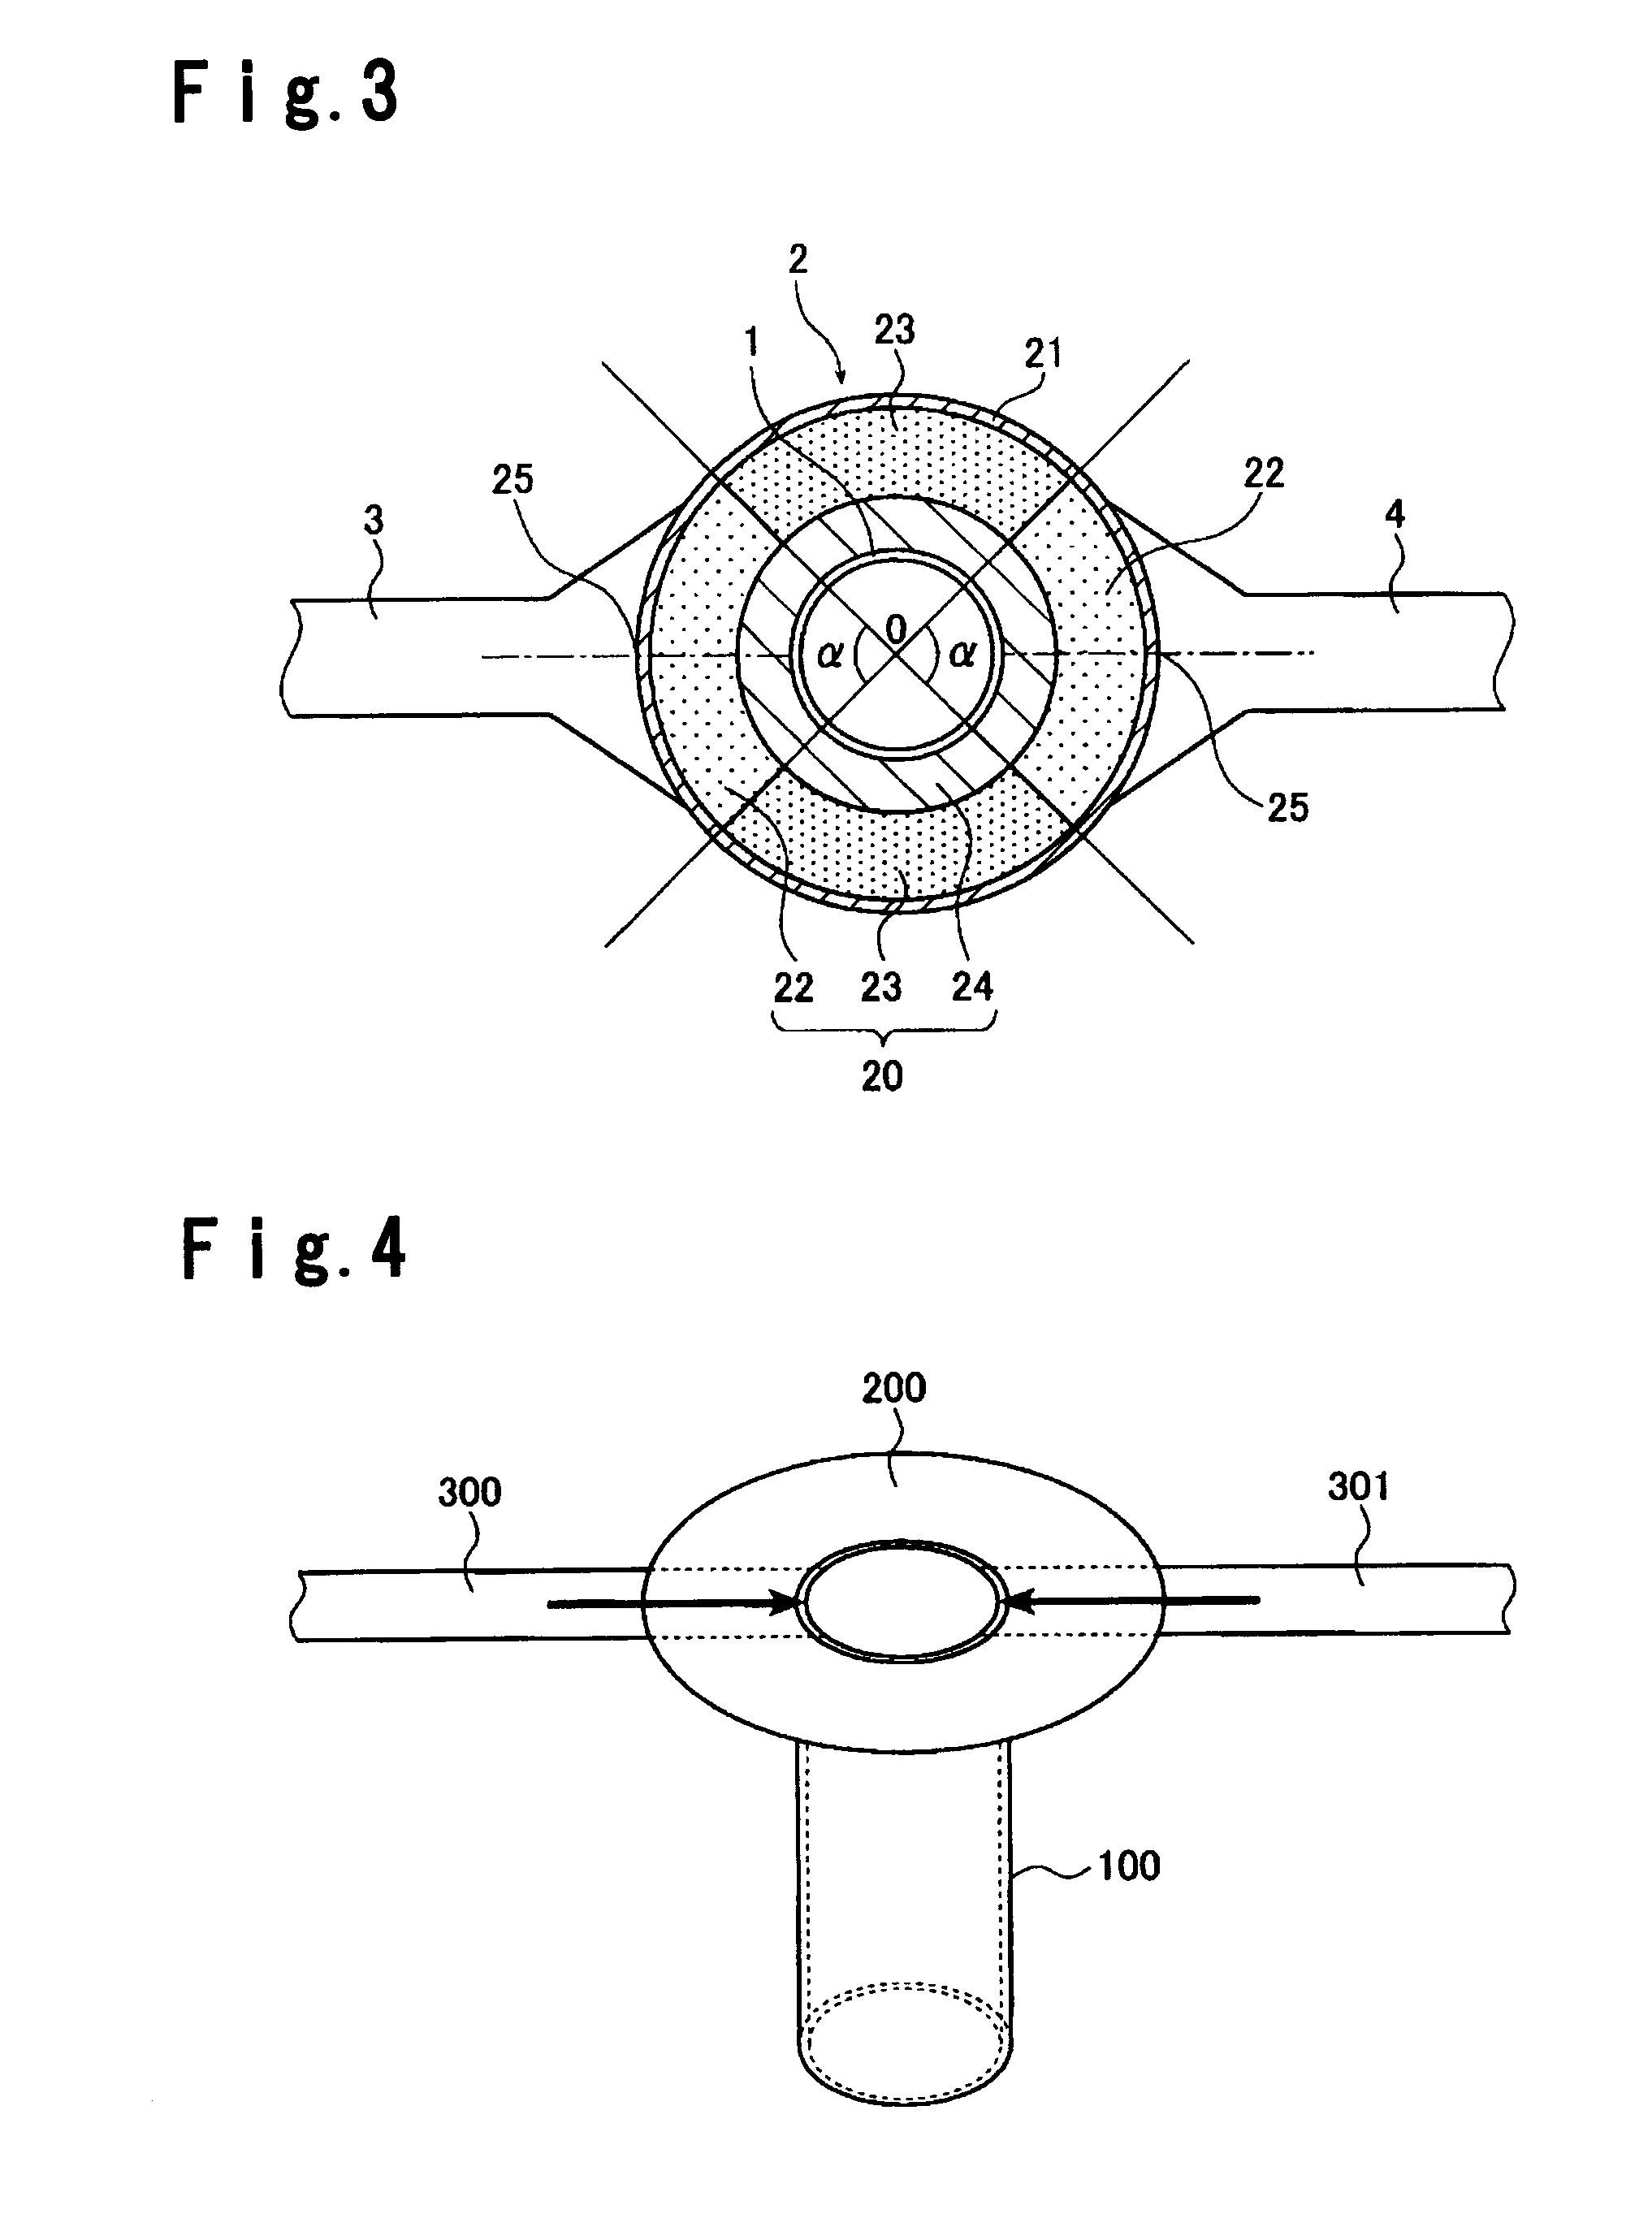 Glass manufacturing apparatus and a structural member thereof